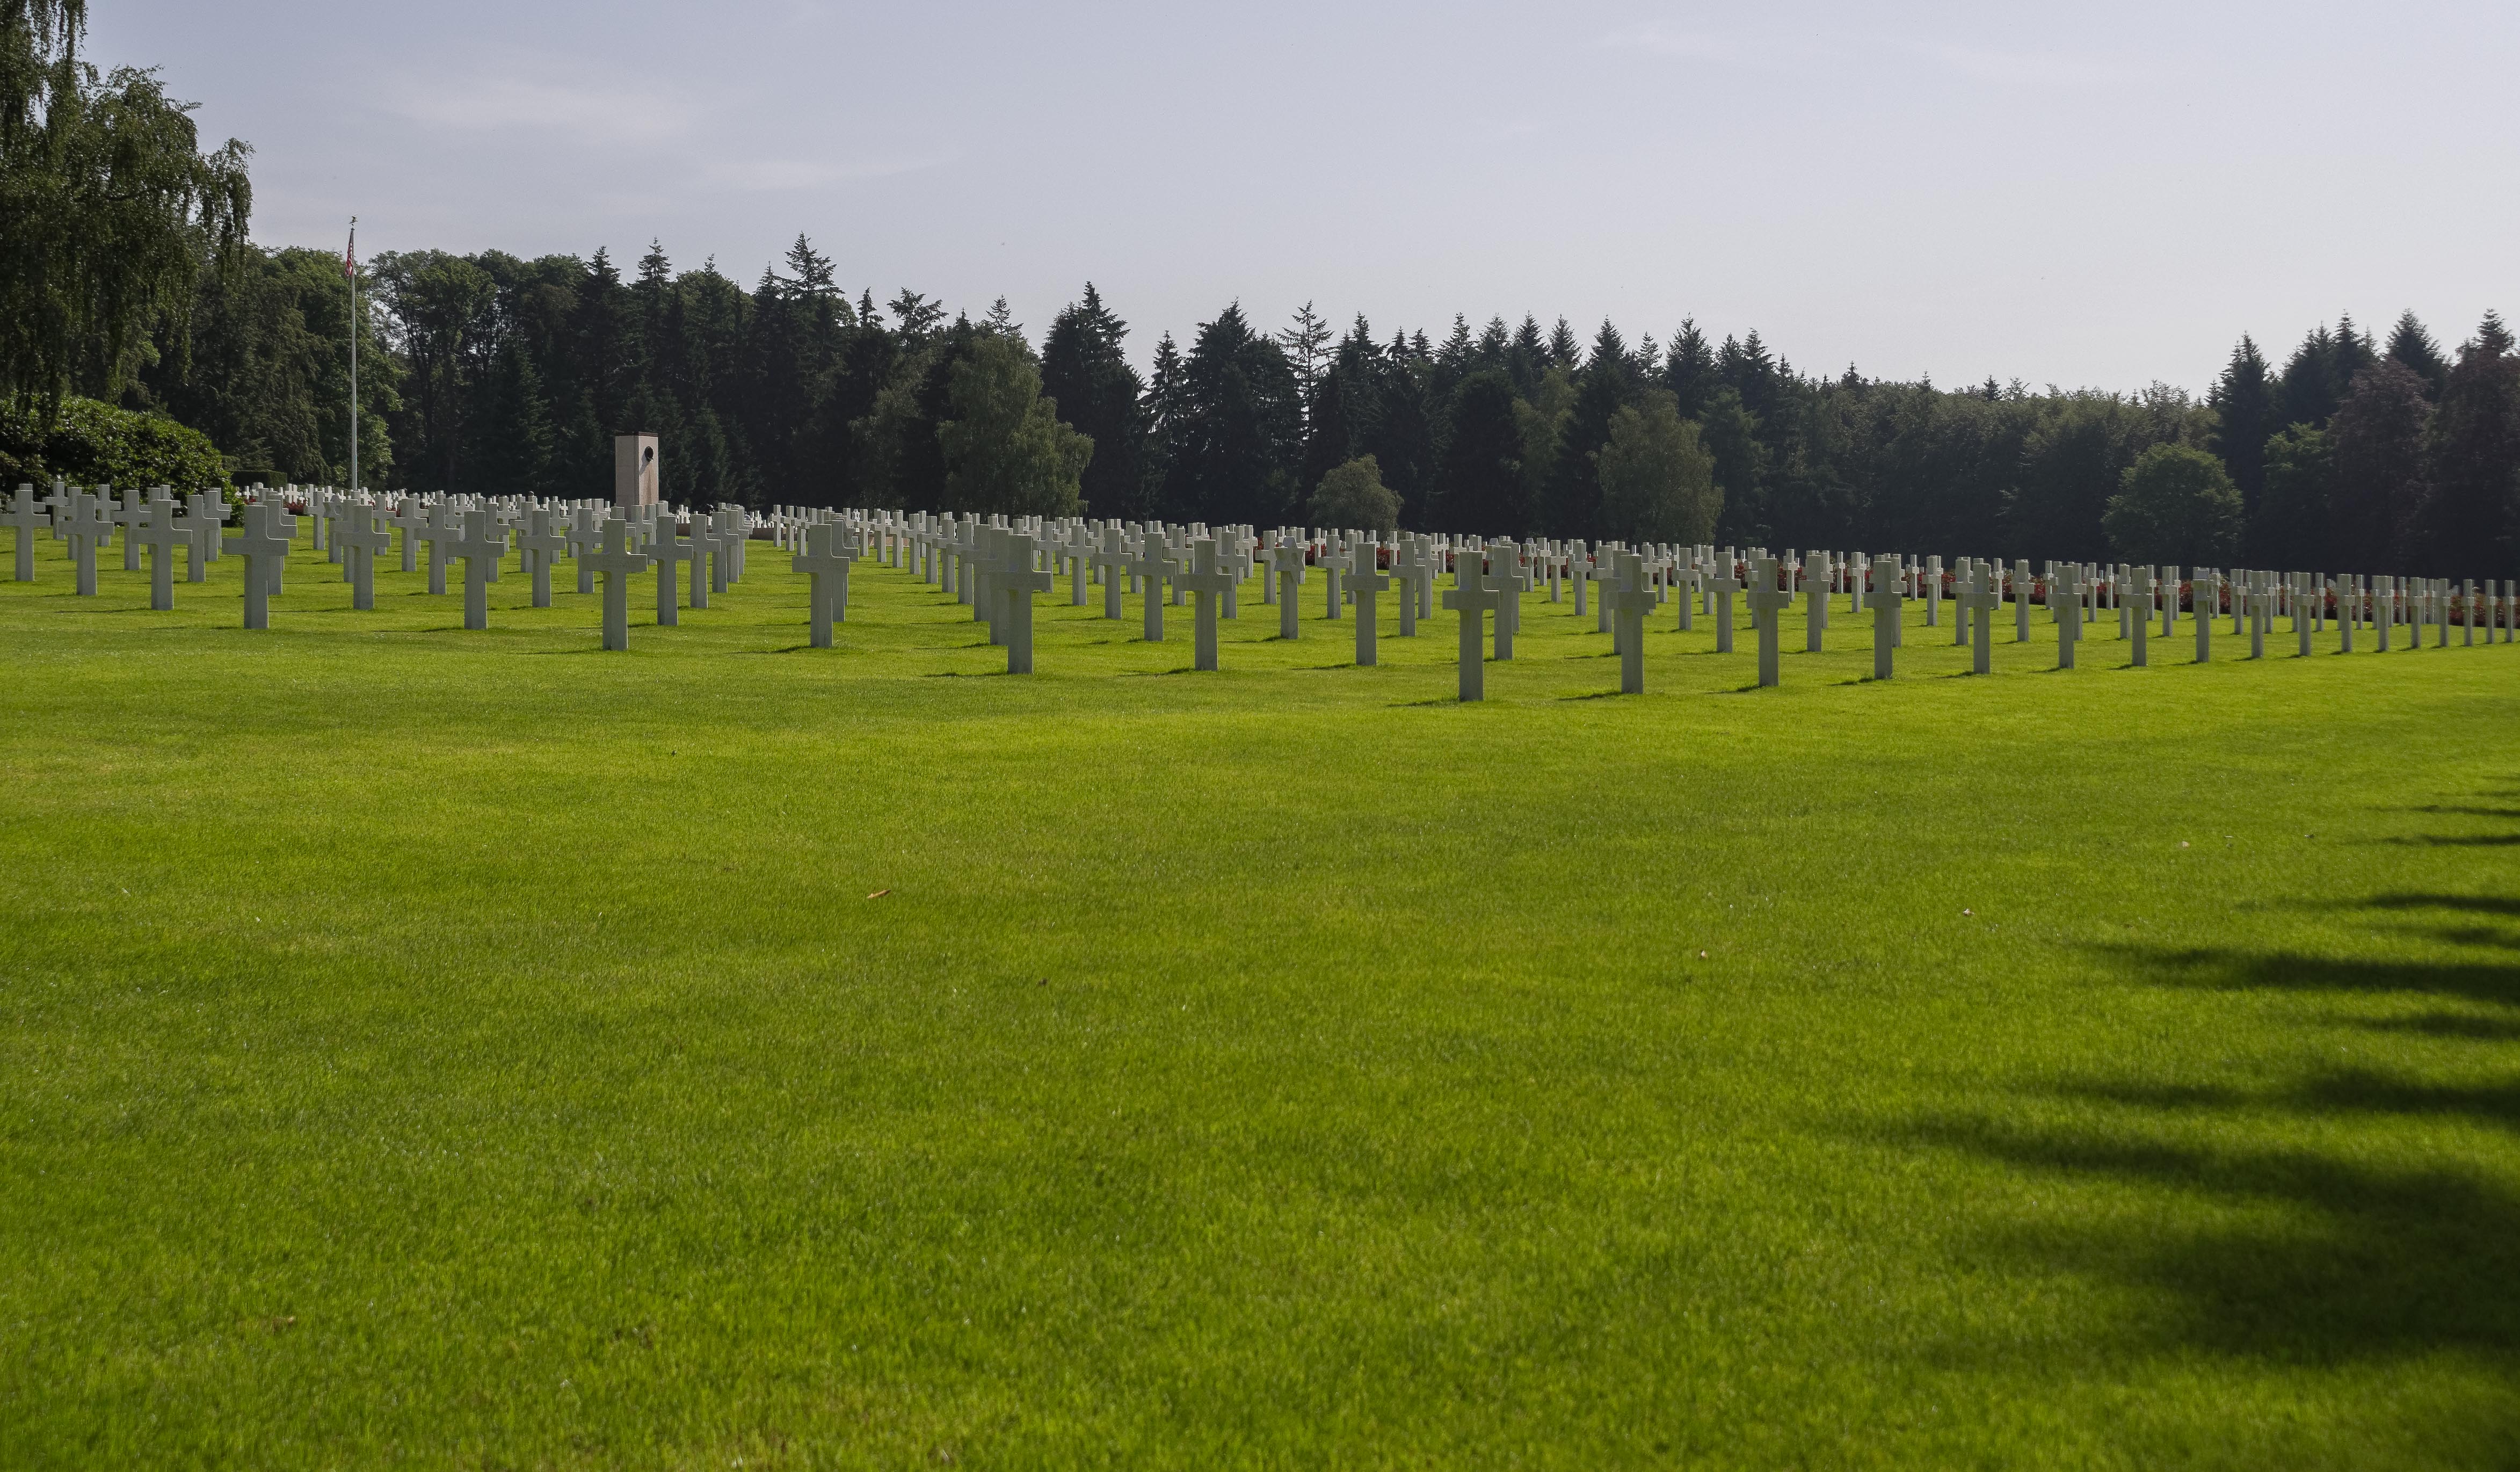 American memorial and cemetery ww ii photo